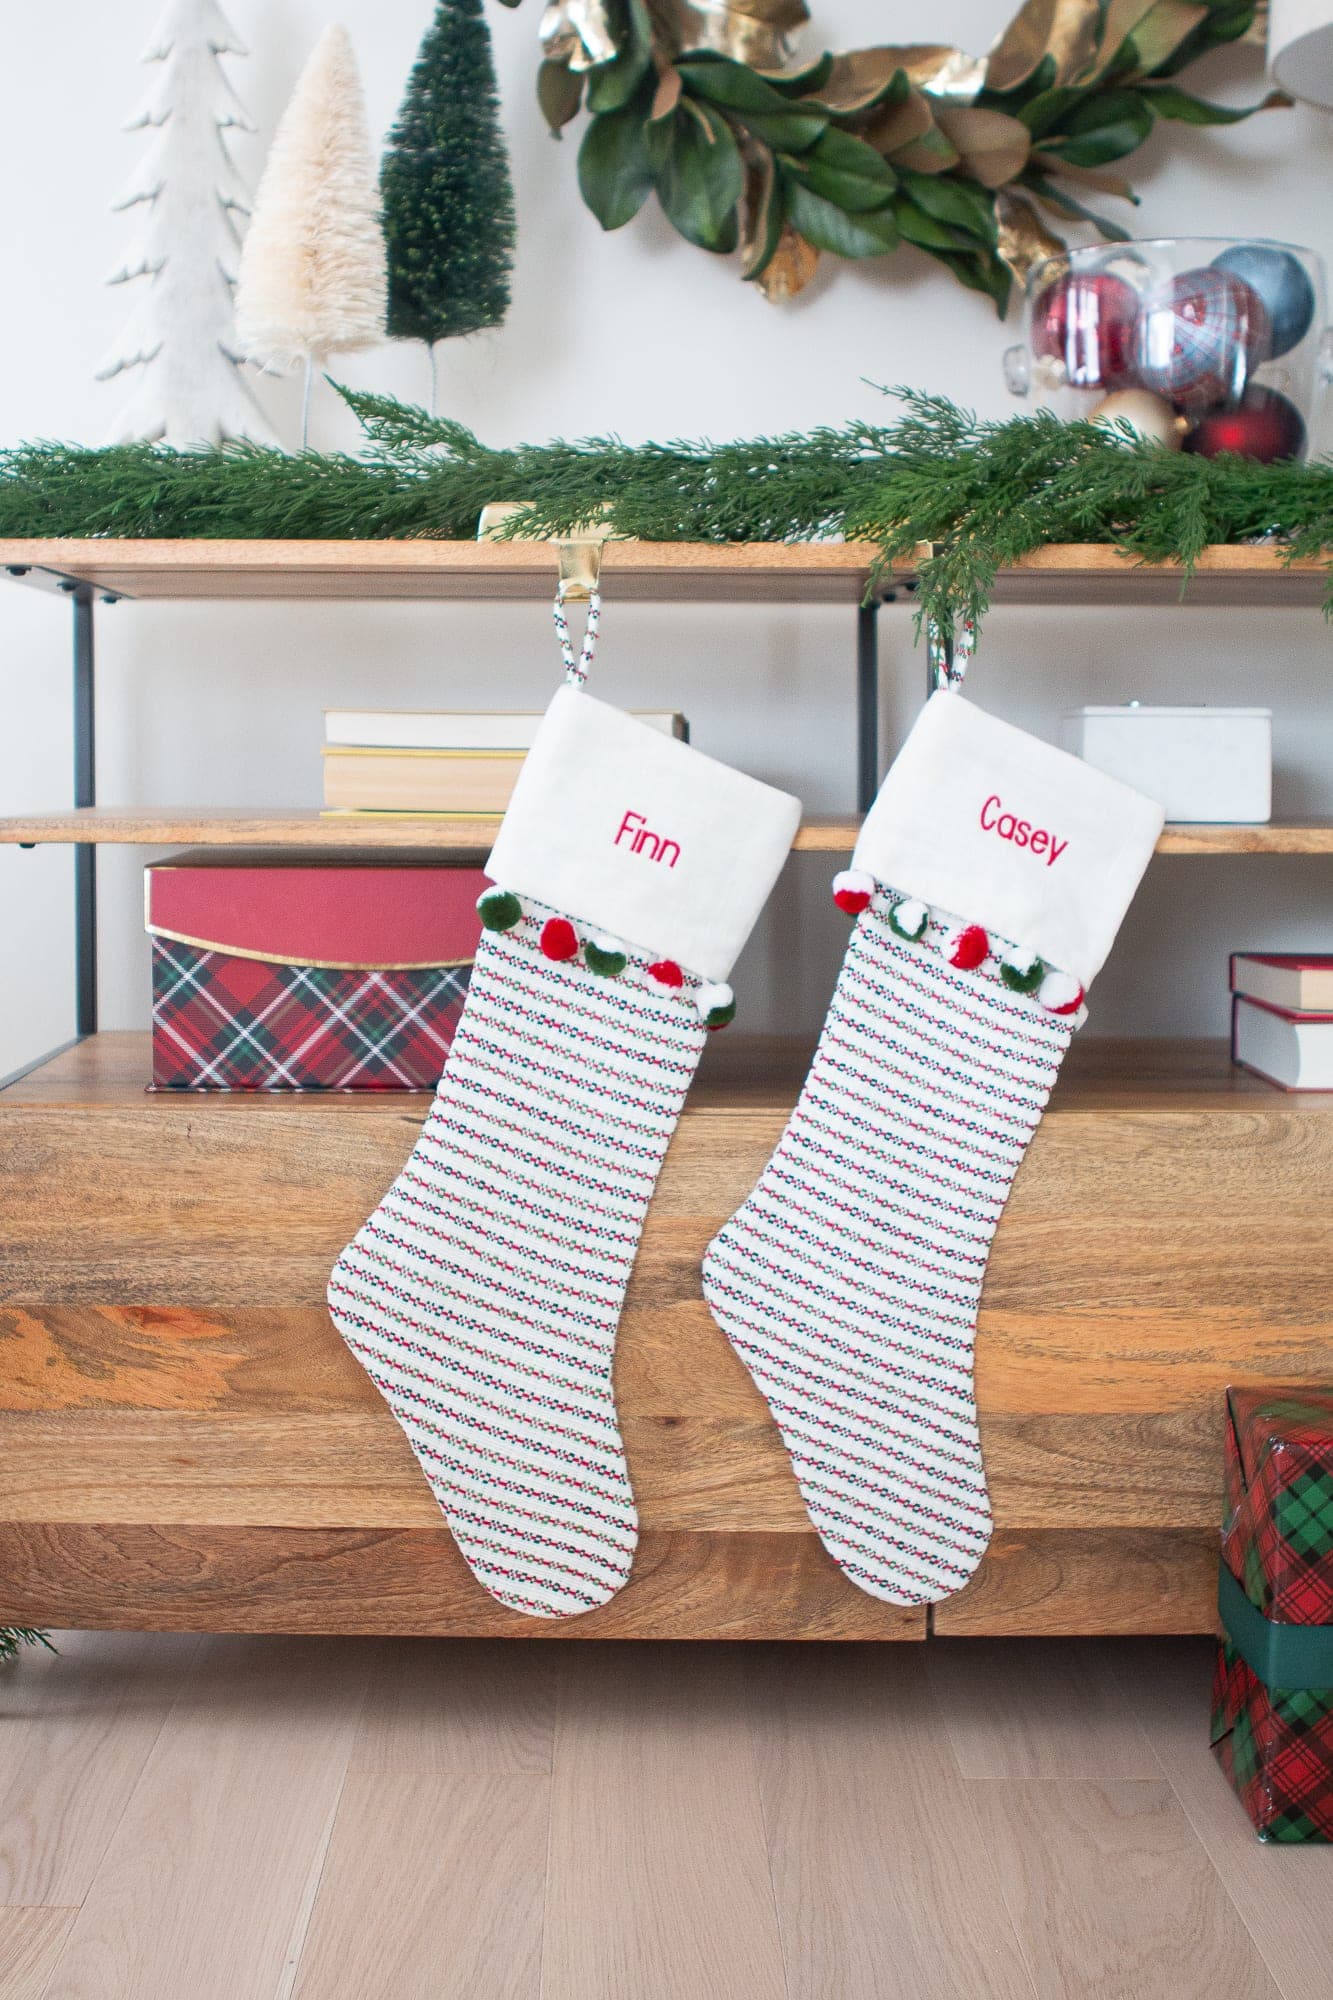 Use stockings in unexpected places in your holiday entry